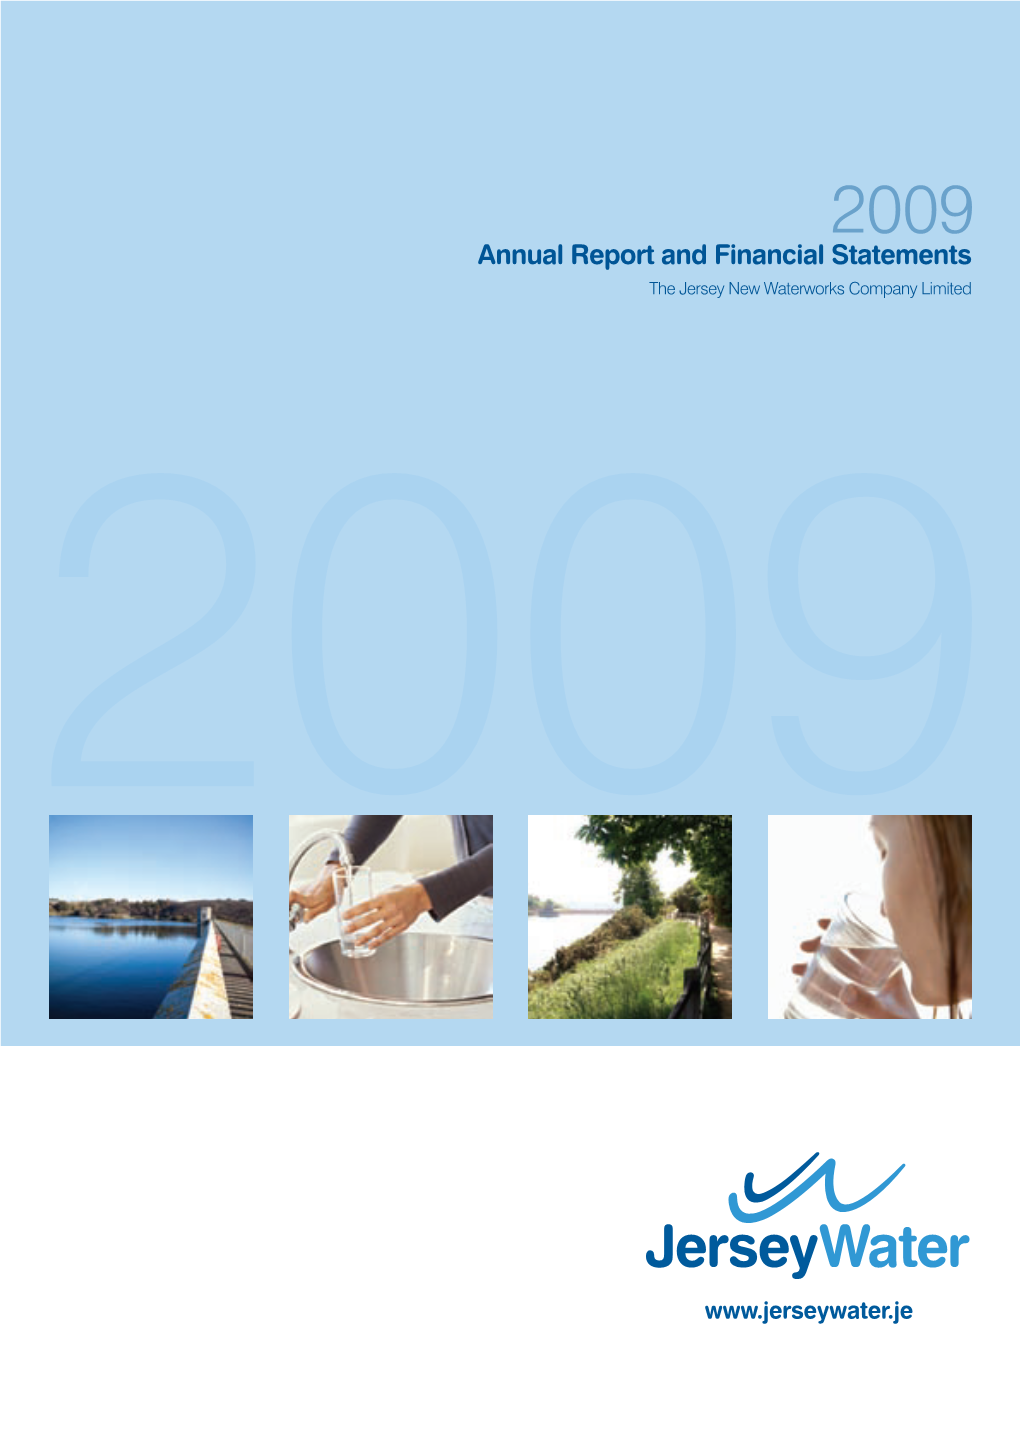 Annual Report and Financial Statements 2009